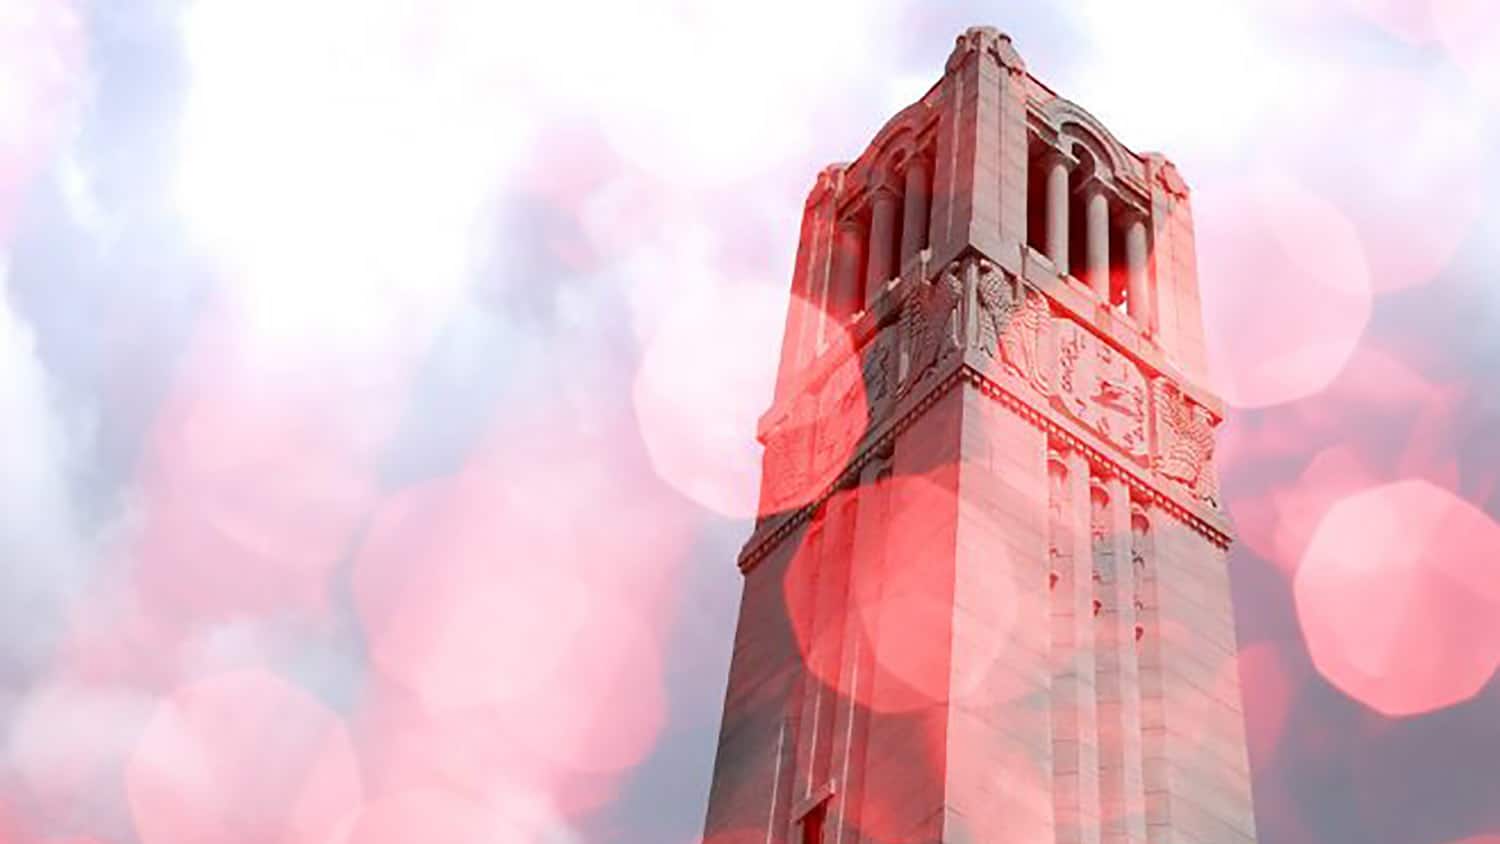 NC State belltower with a red filter